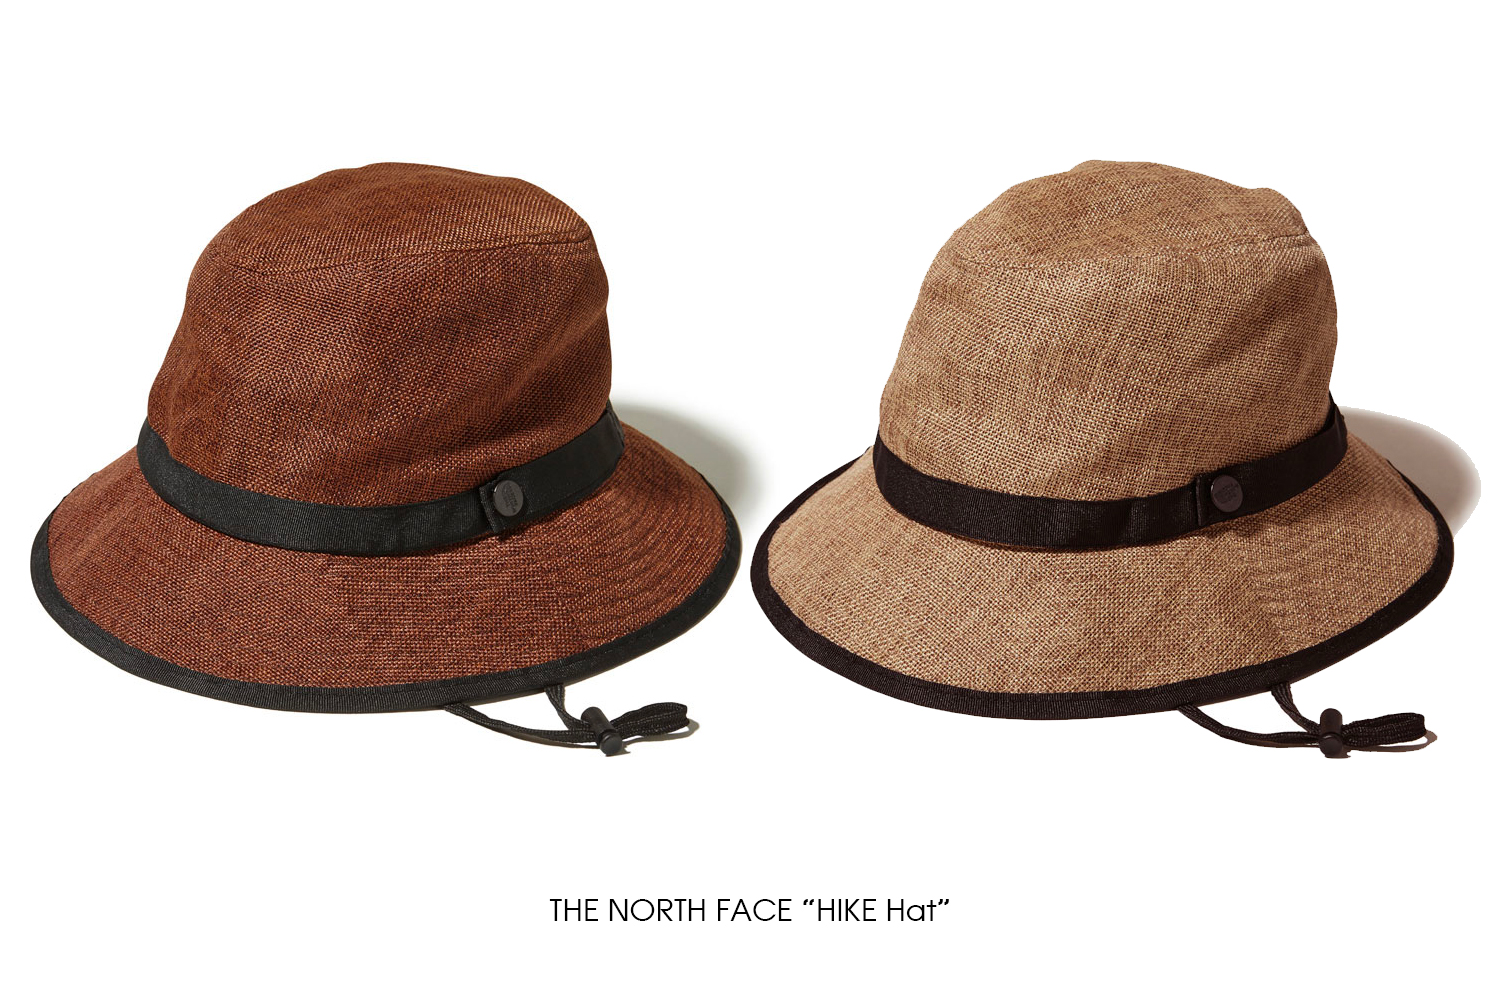 THE NORTH FACE "HIKE Hat"